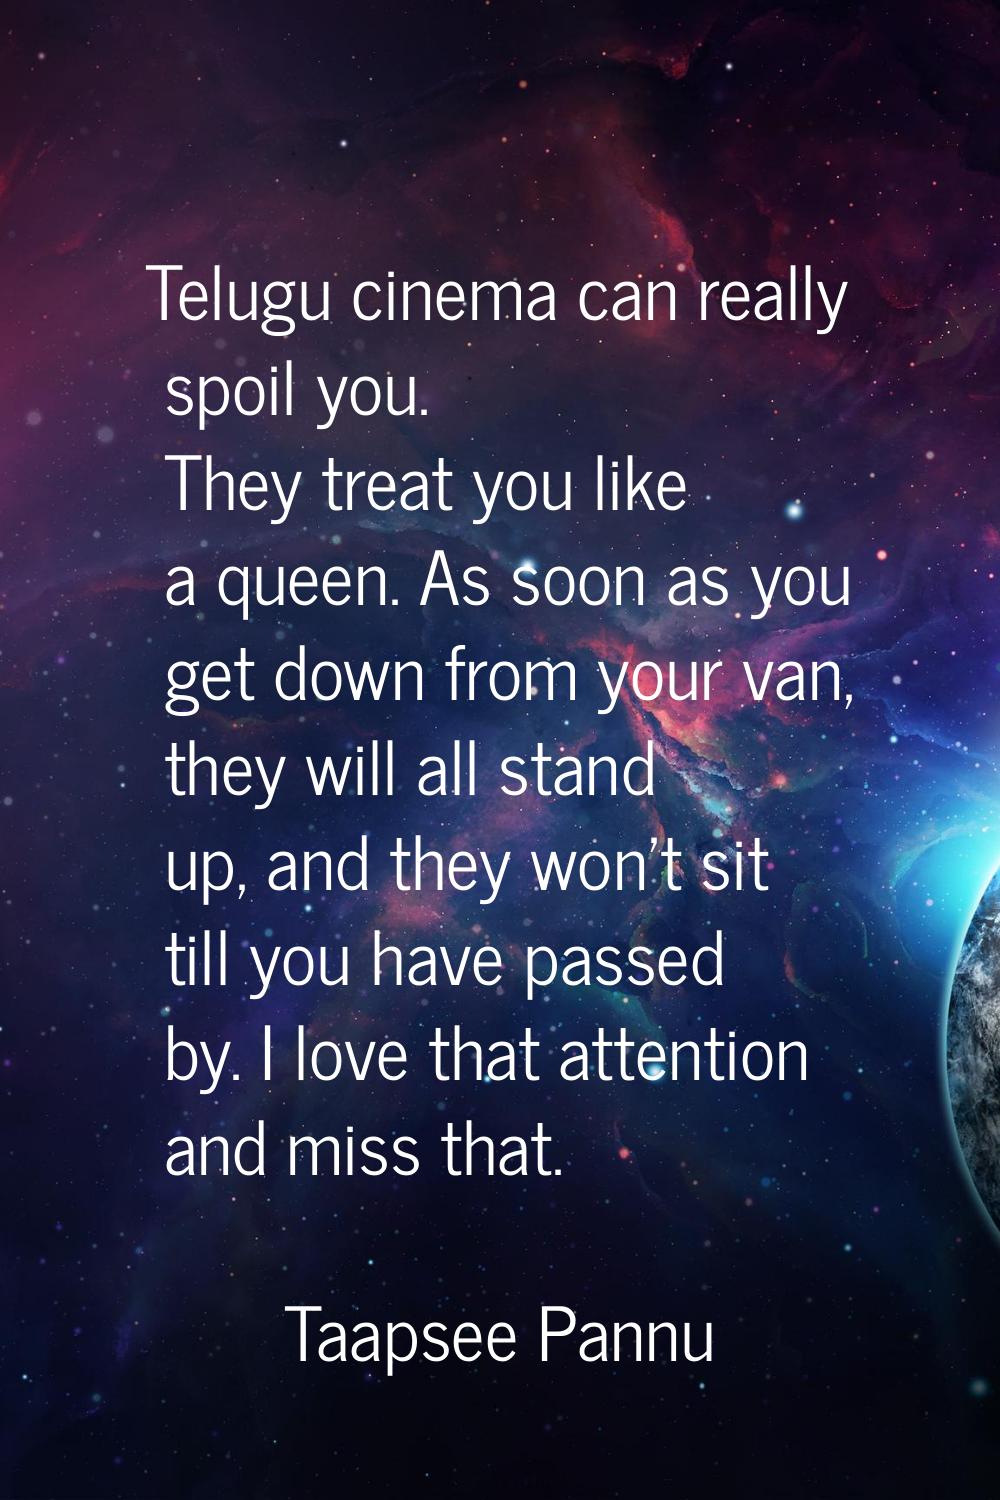 Telugu cinema can really spoil you. They treat you like a queen. As soon as you get down from your 